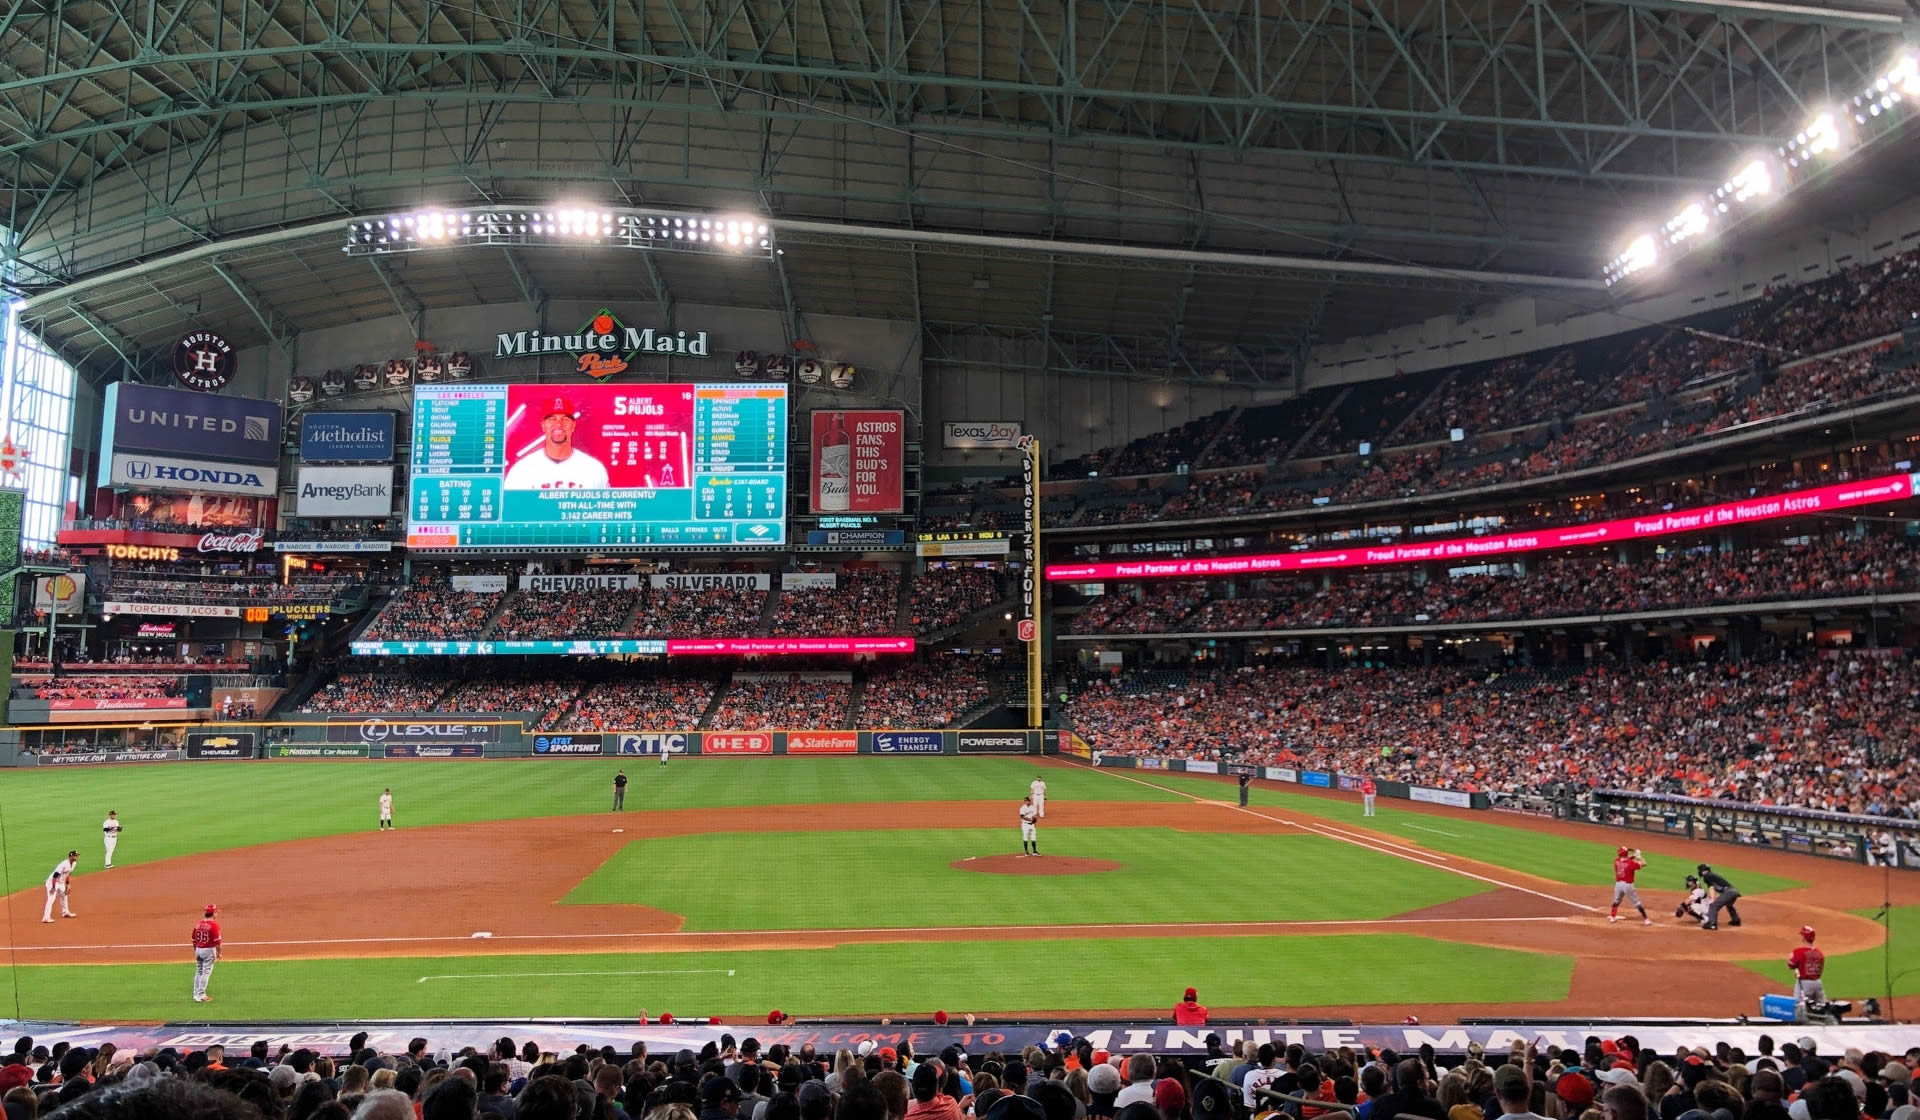 Section 113 at Minute Maid Park 